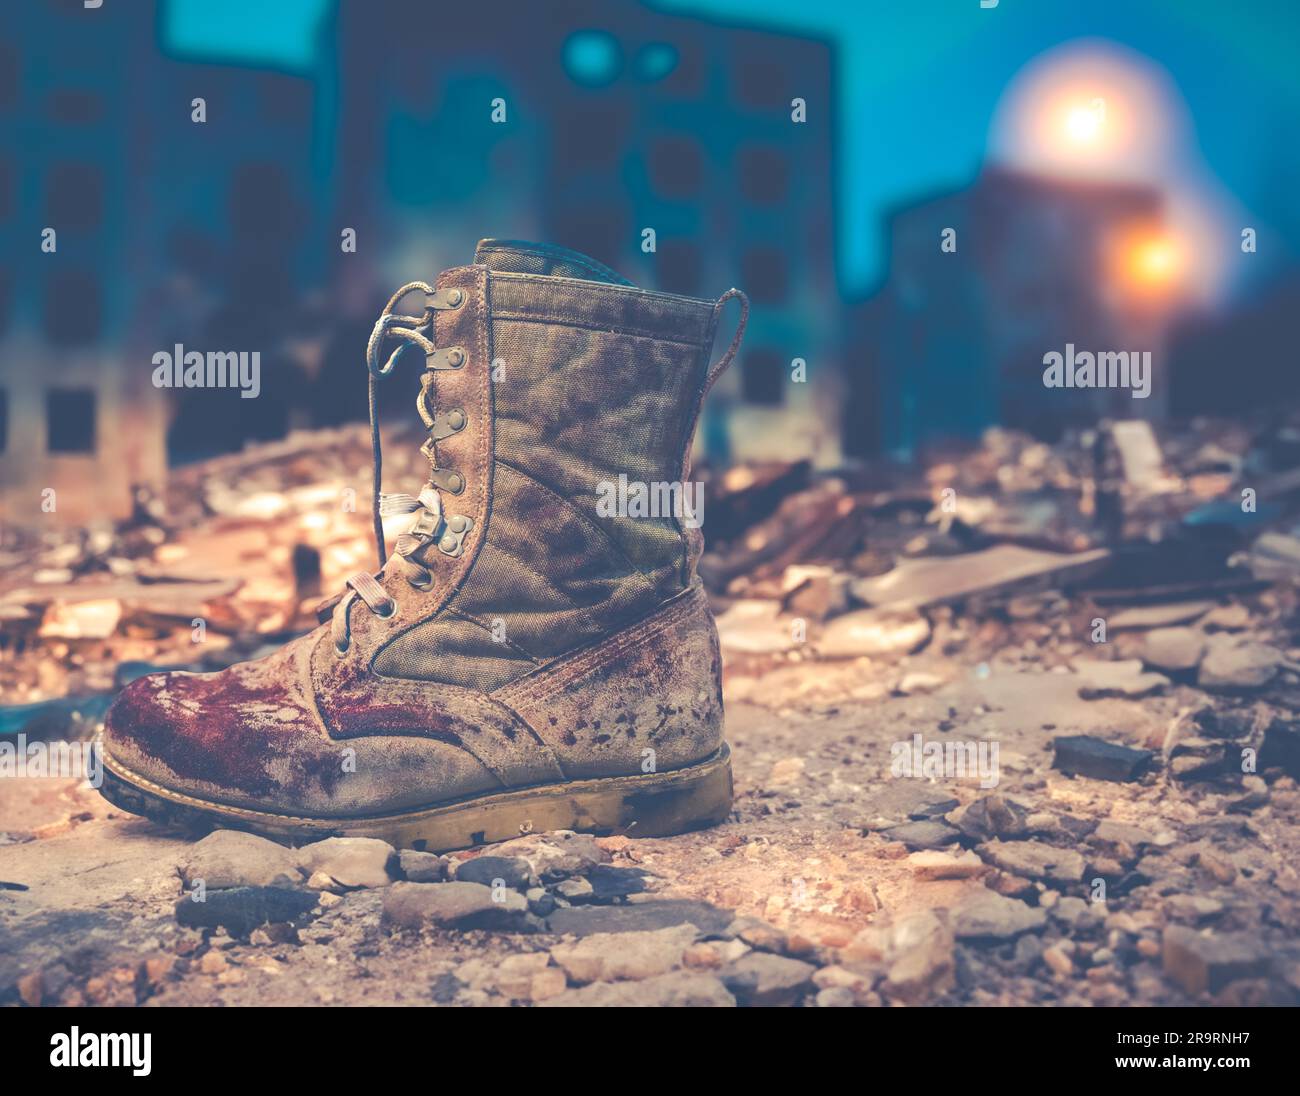 Dirty And Bloody Army Boot In A Ruined War Zone City At Night Stock Photo